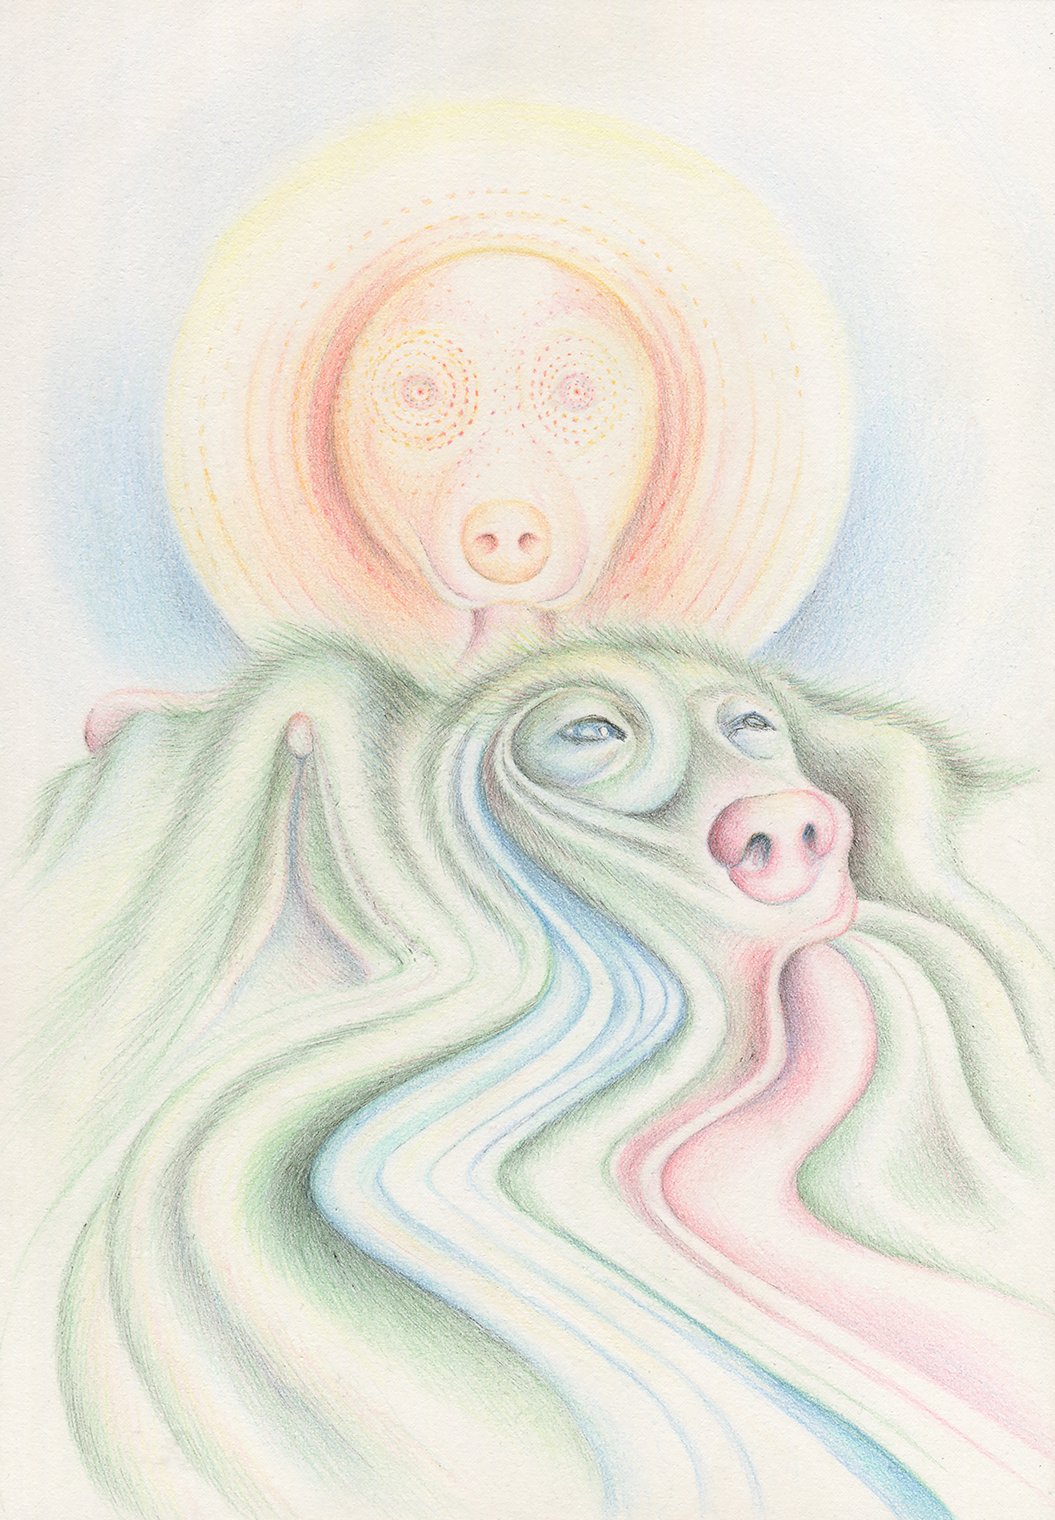  “Heliotherapy”, Ink and colored pencil on paper, 7x10”, 2021. 